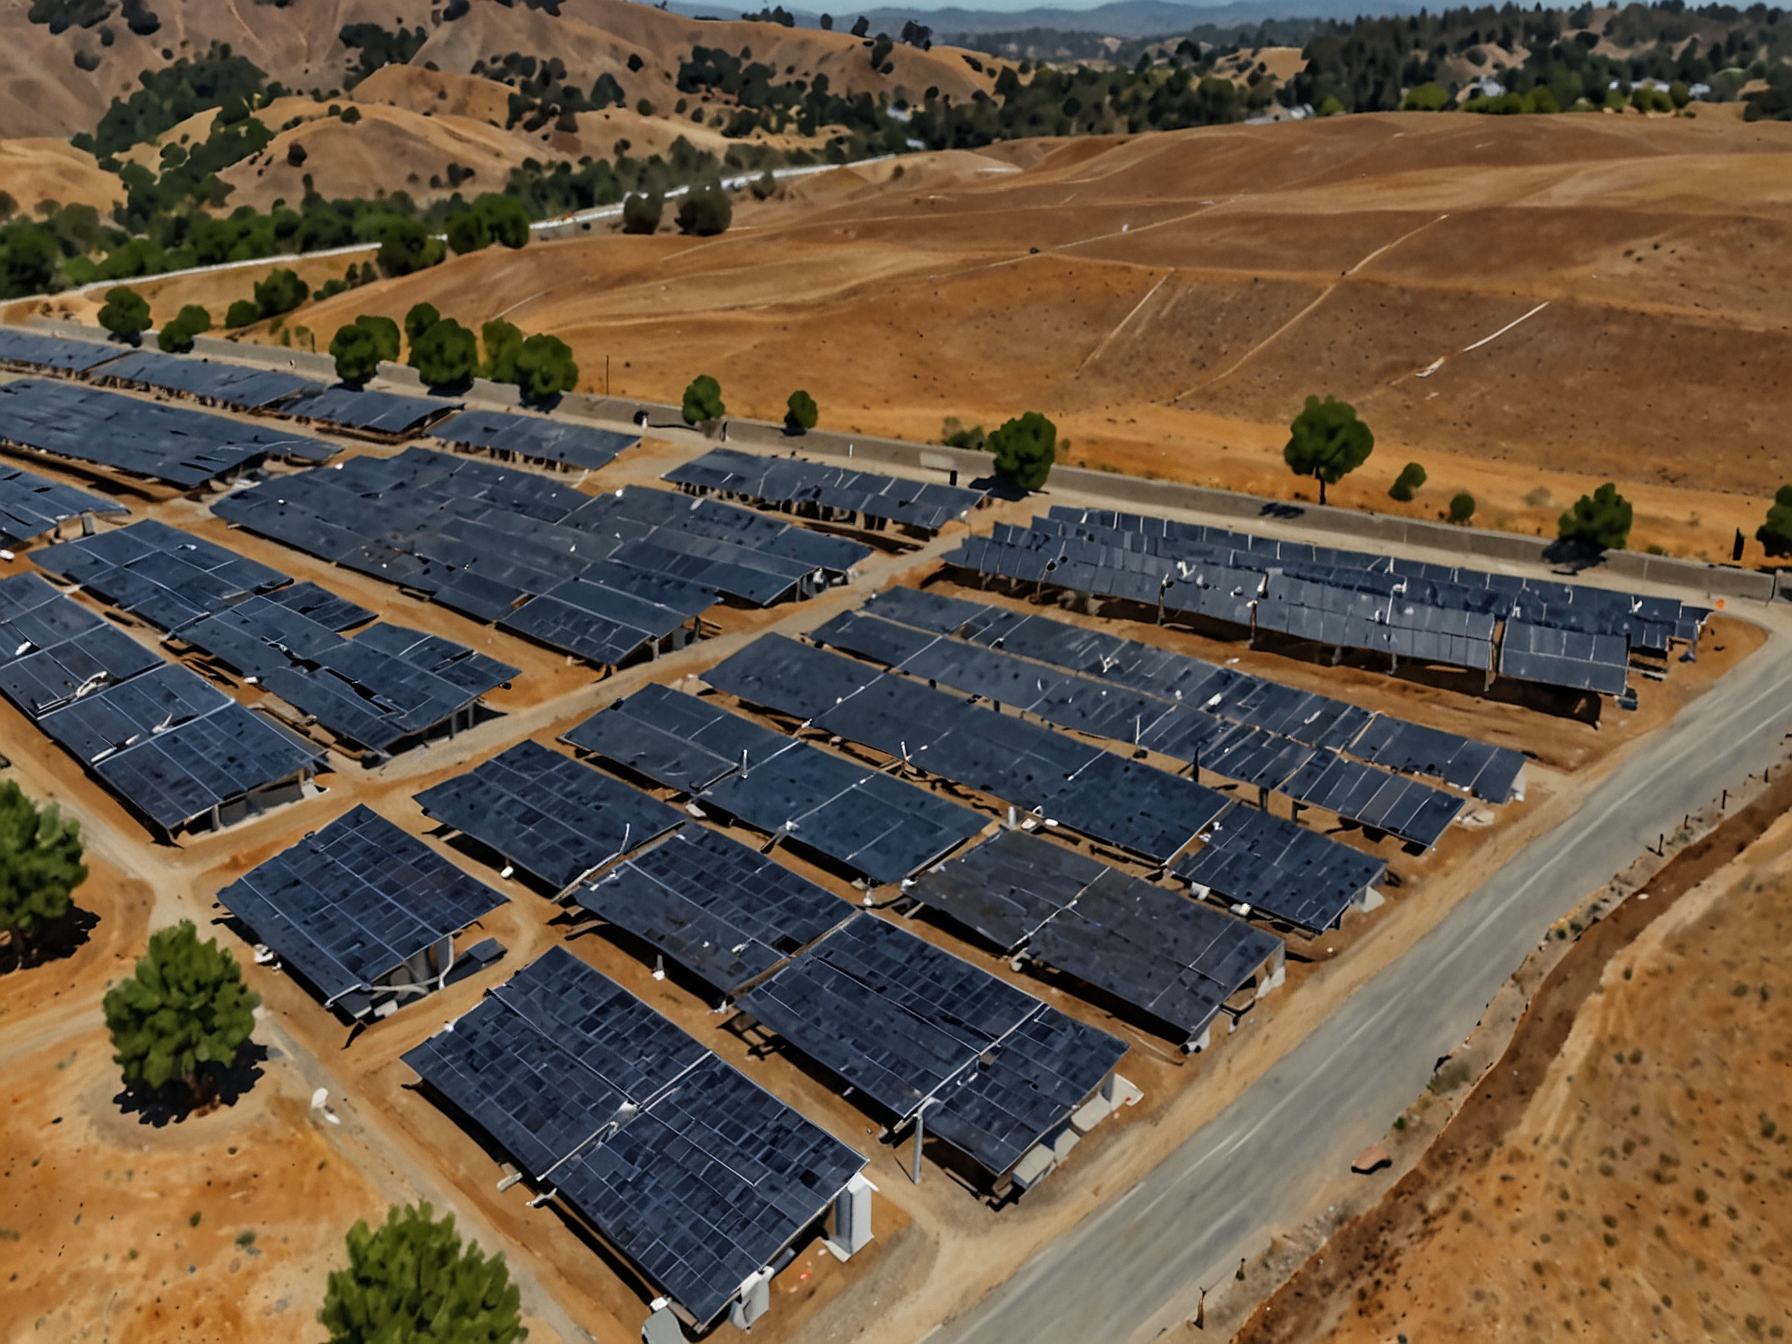 An aerial view of the 2.16 MW solar array installation near Central Contra Costa Sanitary District's treatment plant in Martinez, California, showcasing rows of solar panels generating clean energy.